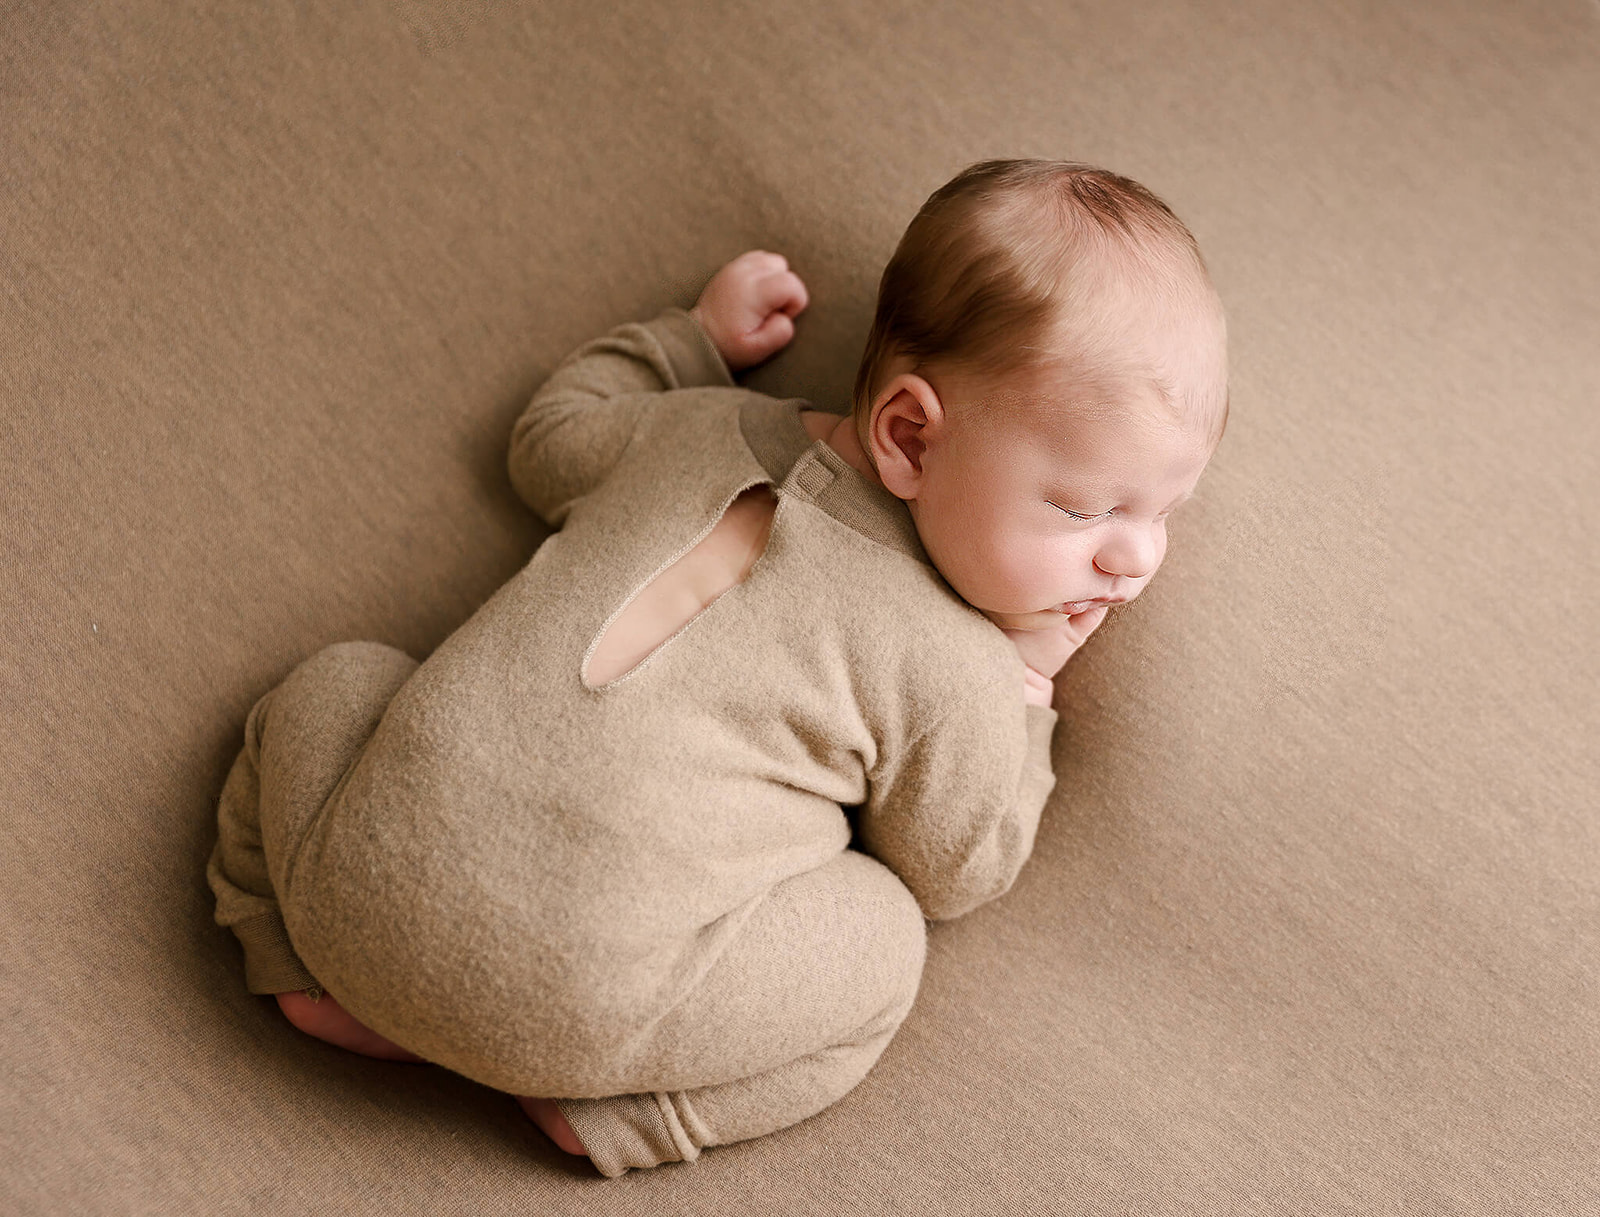 A newborn baby in a brown onesie sleeps in a froggy pose